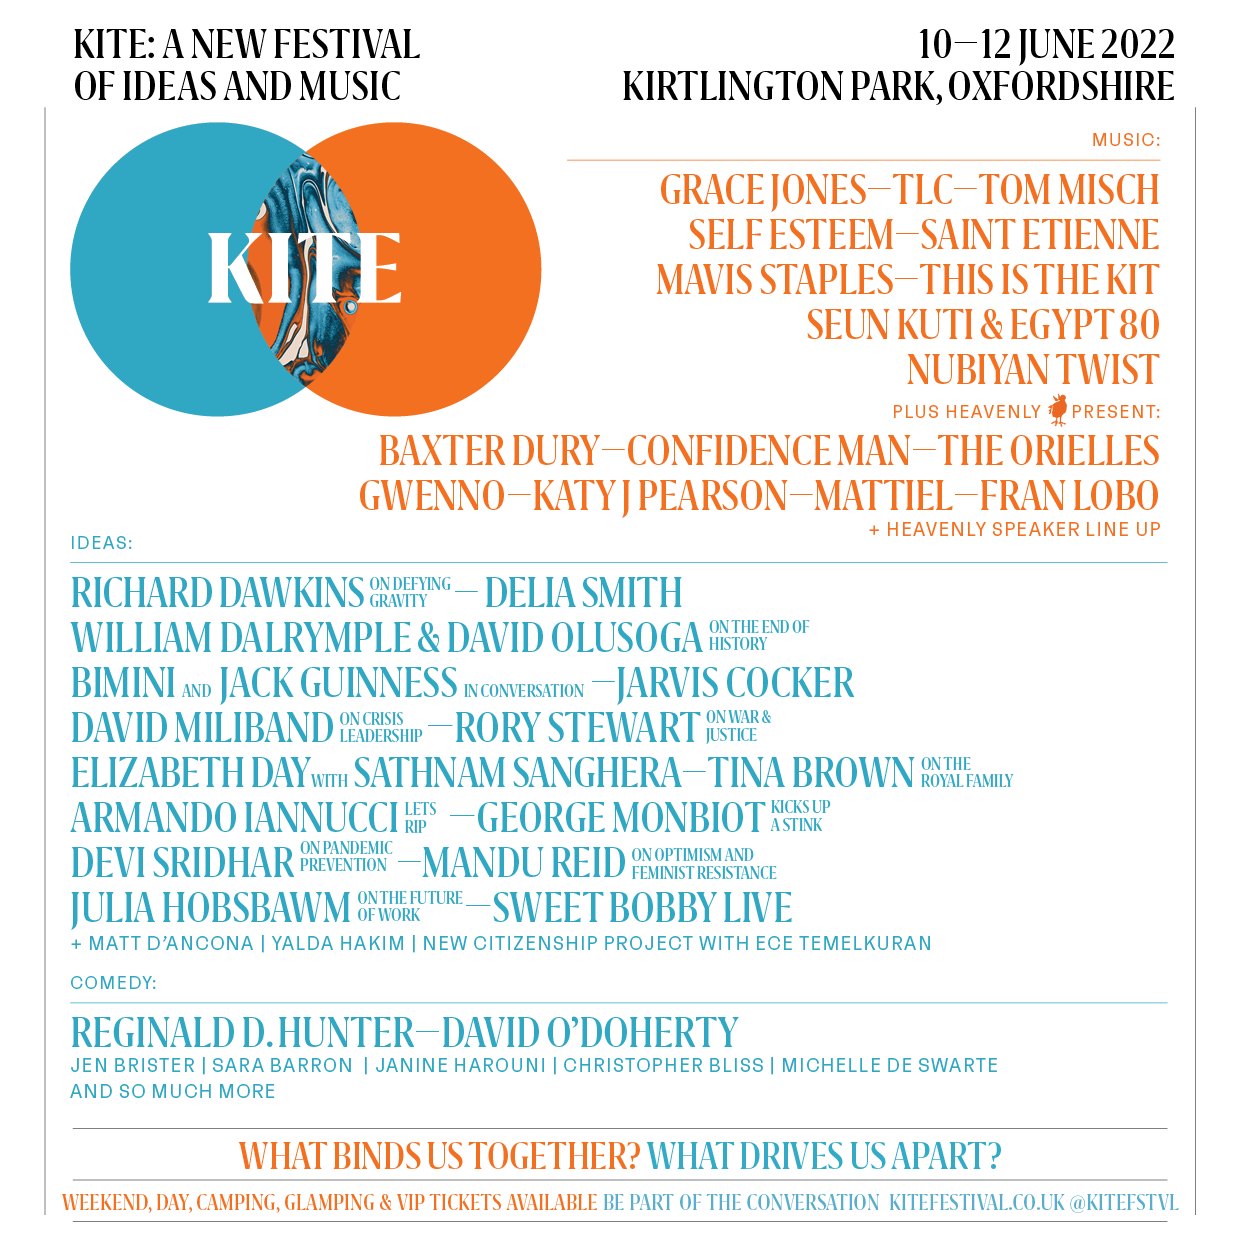 NEWS: Kite Festival announces even more great names to its 2022 line-up 2